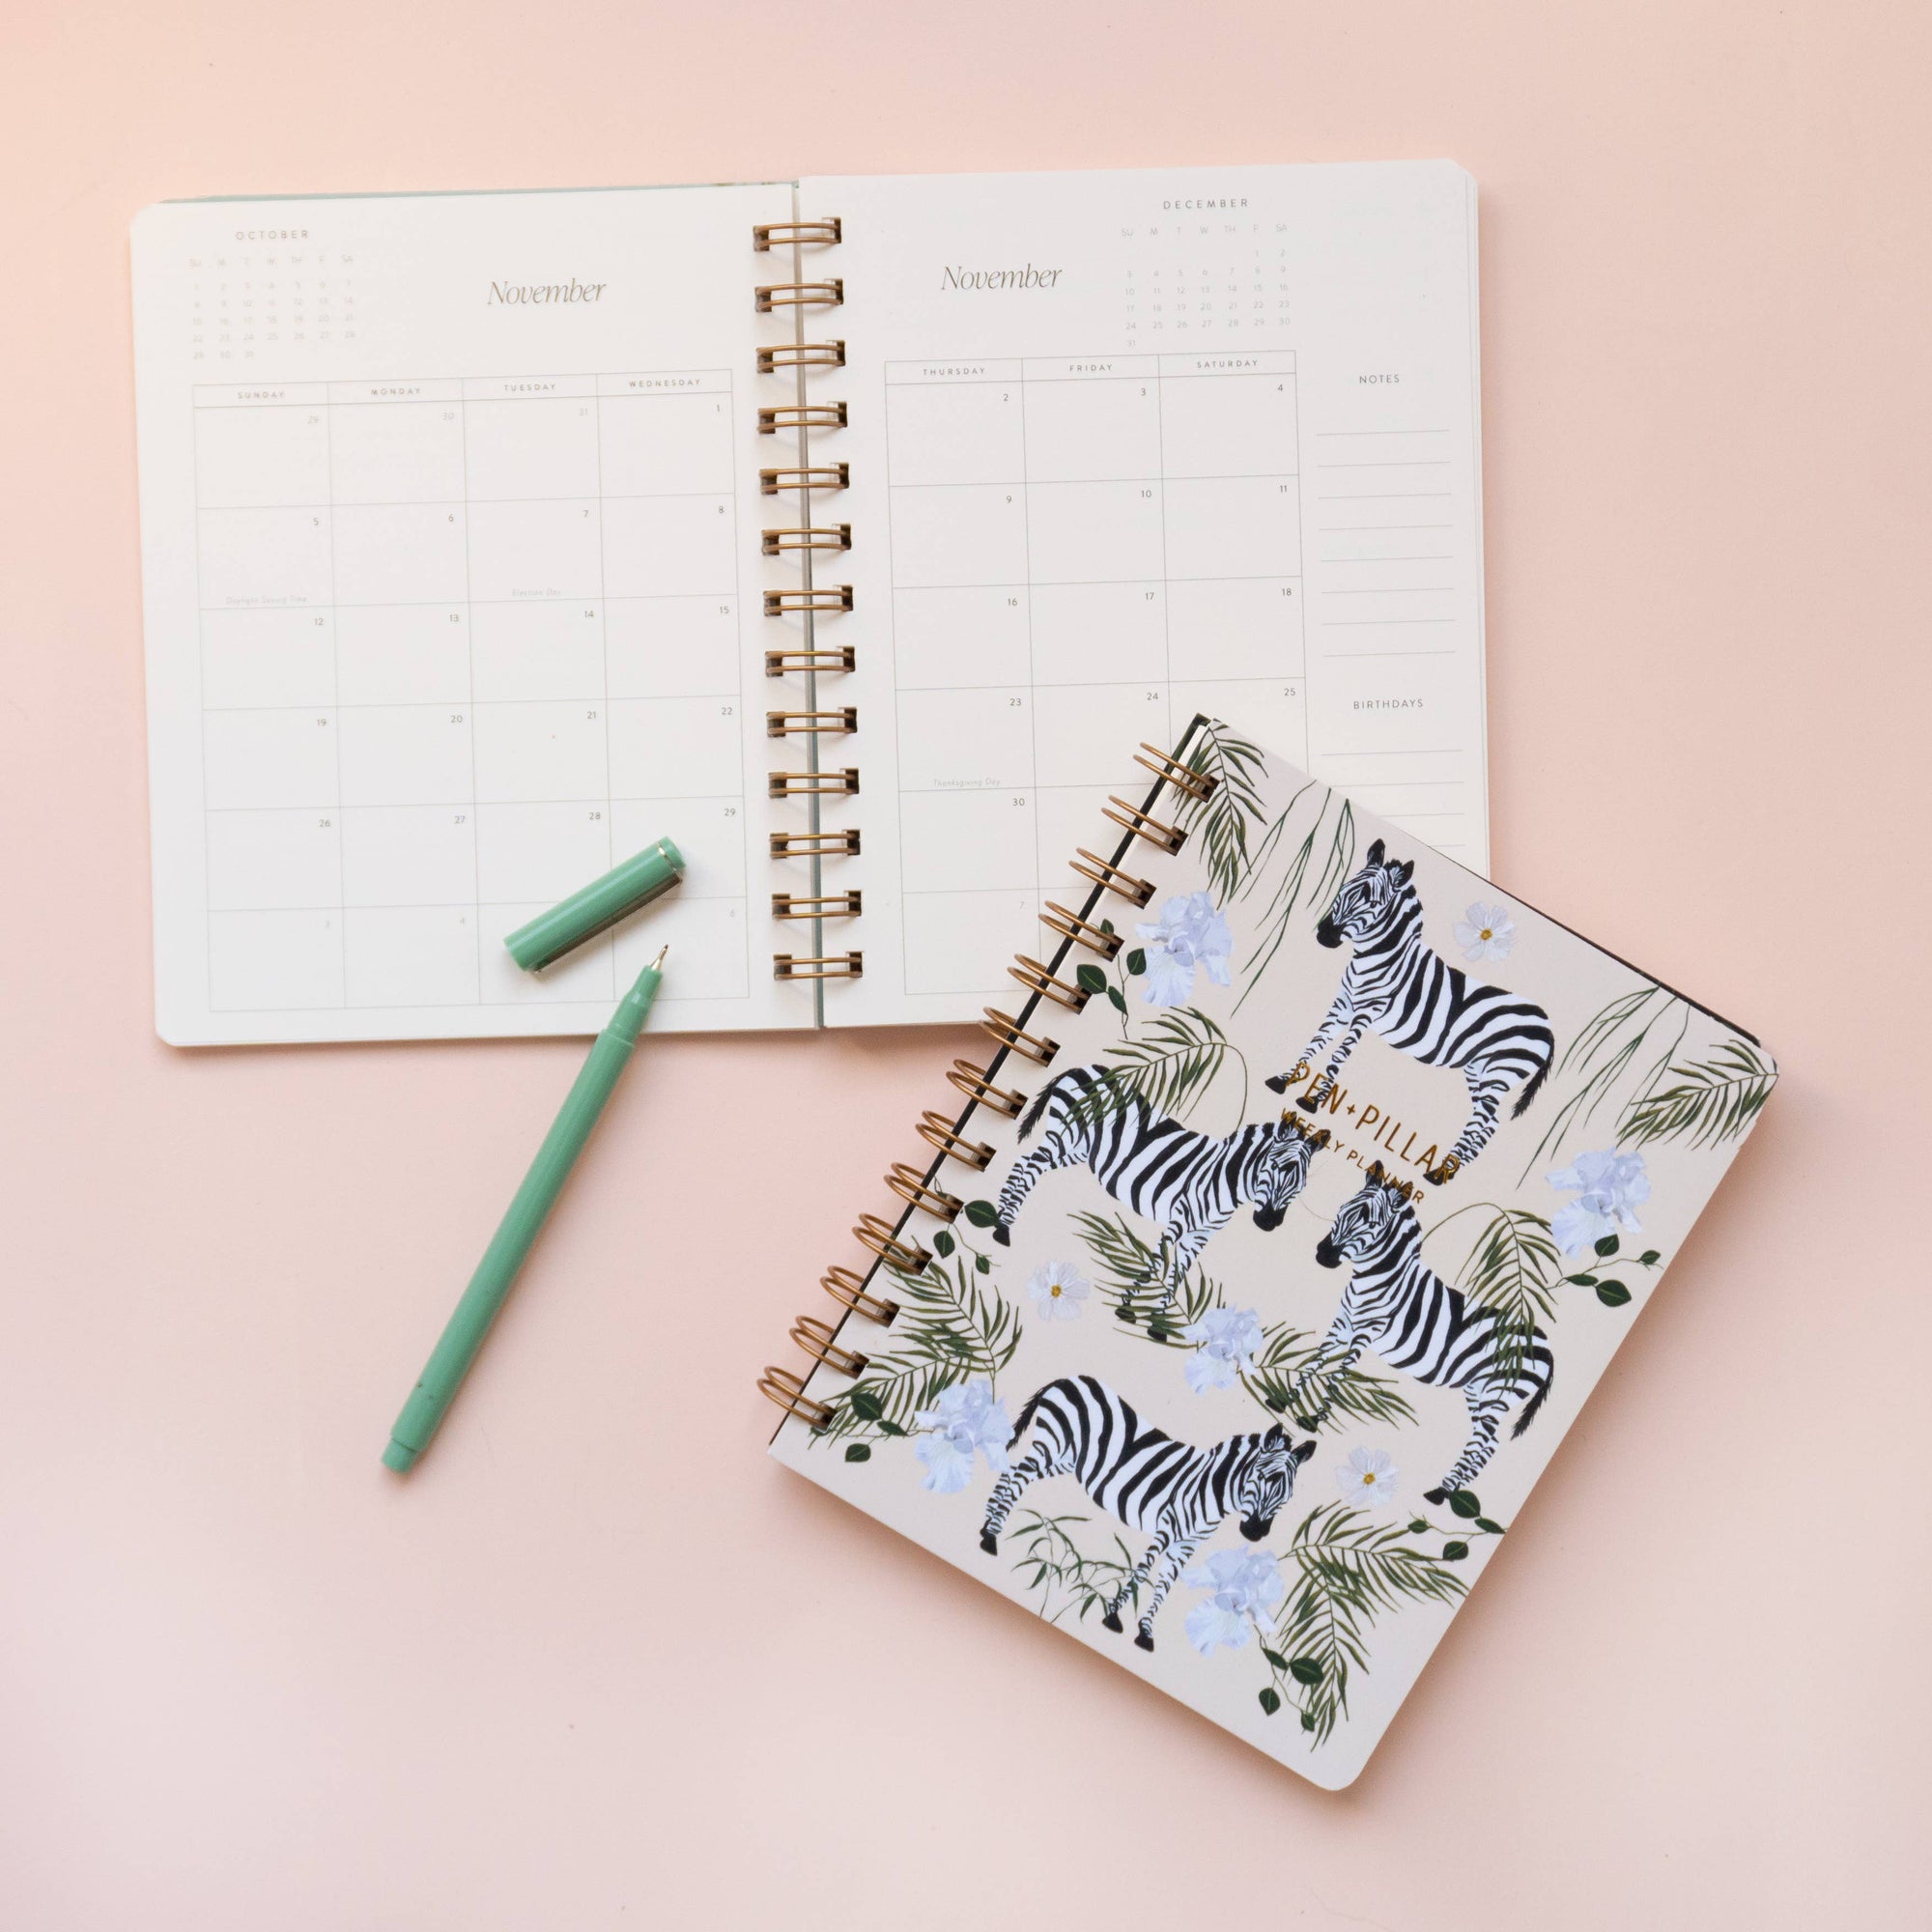 DAILY GRID PLANS NON-DATED DAILY PLANNER – Fringe Studio